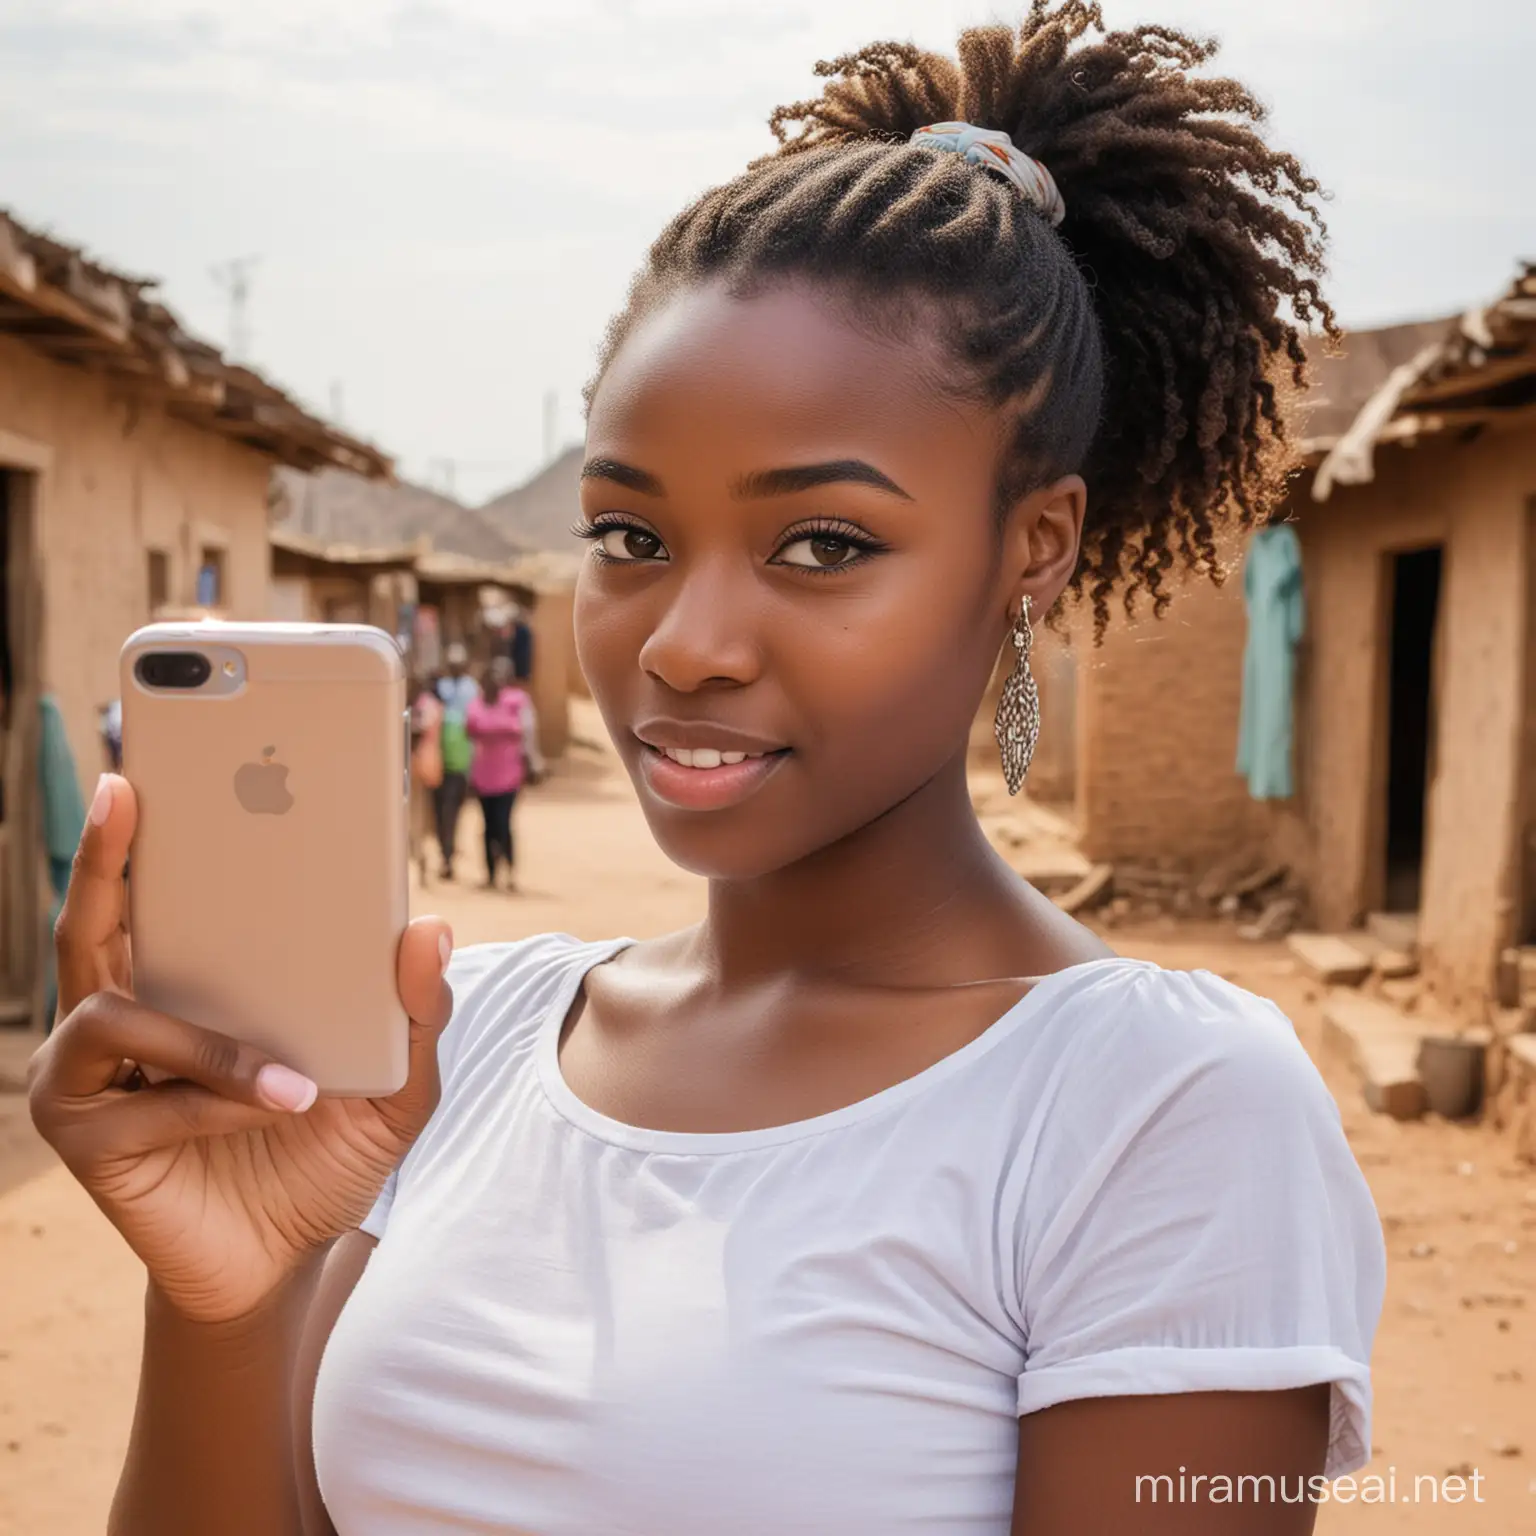 YOung african girl, 18 years old,  wearing make up, earrings, hair held in a ponytail, holding a smart phone taking a selfie in an african village shopping center. heavily pregnant,